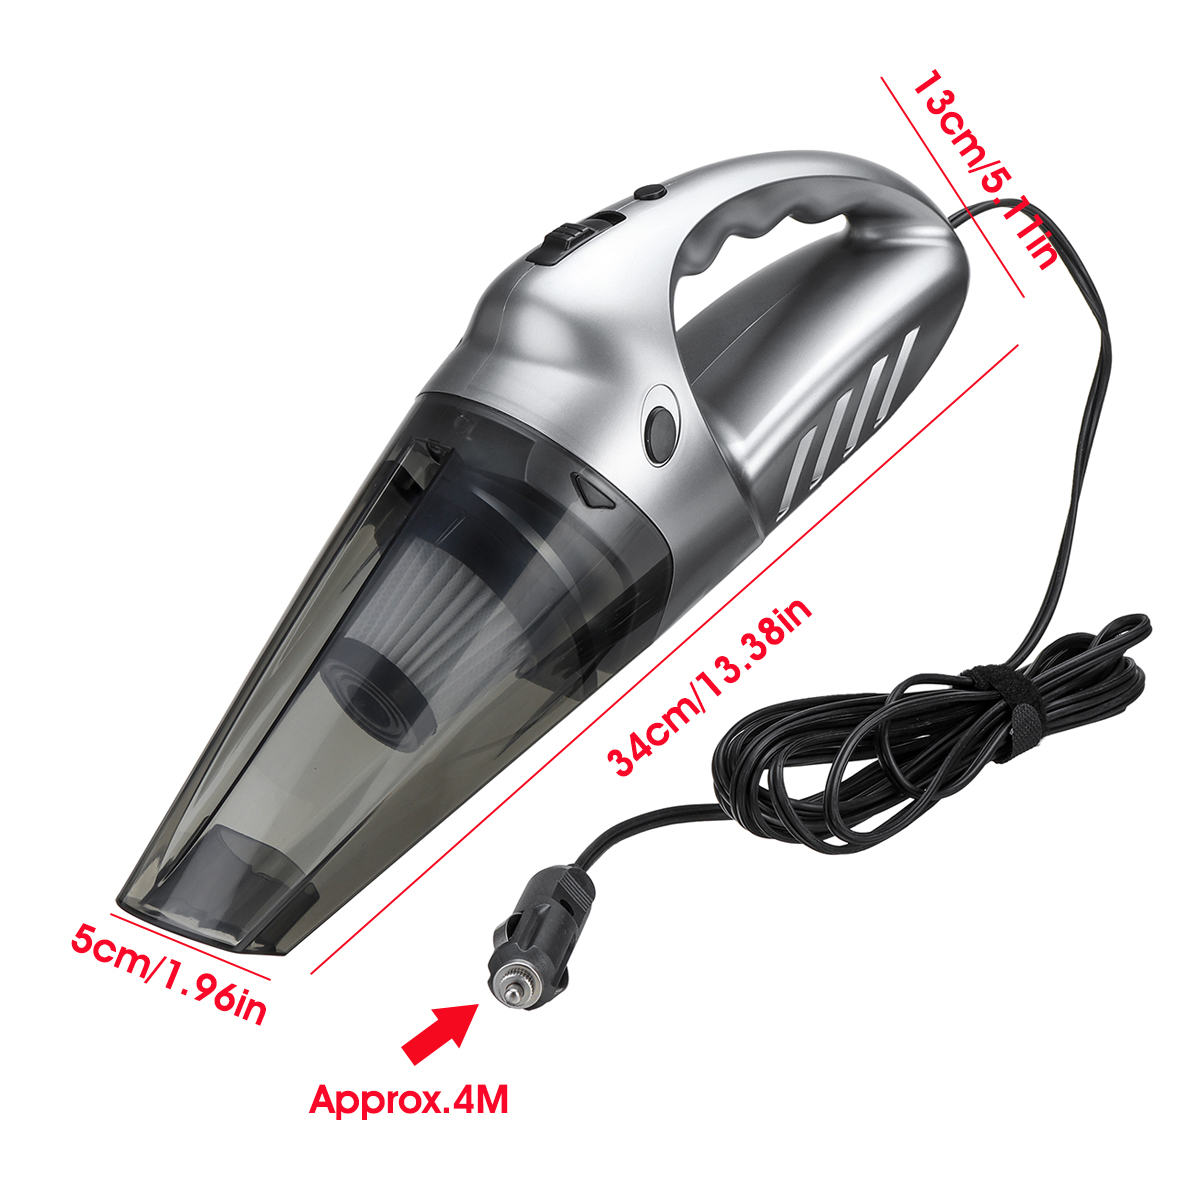 120W-Portable-Auto-Car-Handheld-Vacuum-Cleaner-Duster-Wet--Dry-Dirt-Suction-with-LED-Light-1624459-9